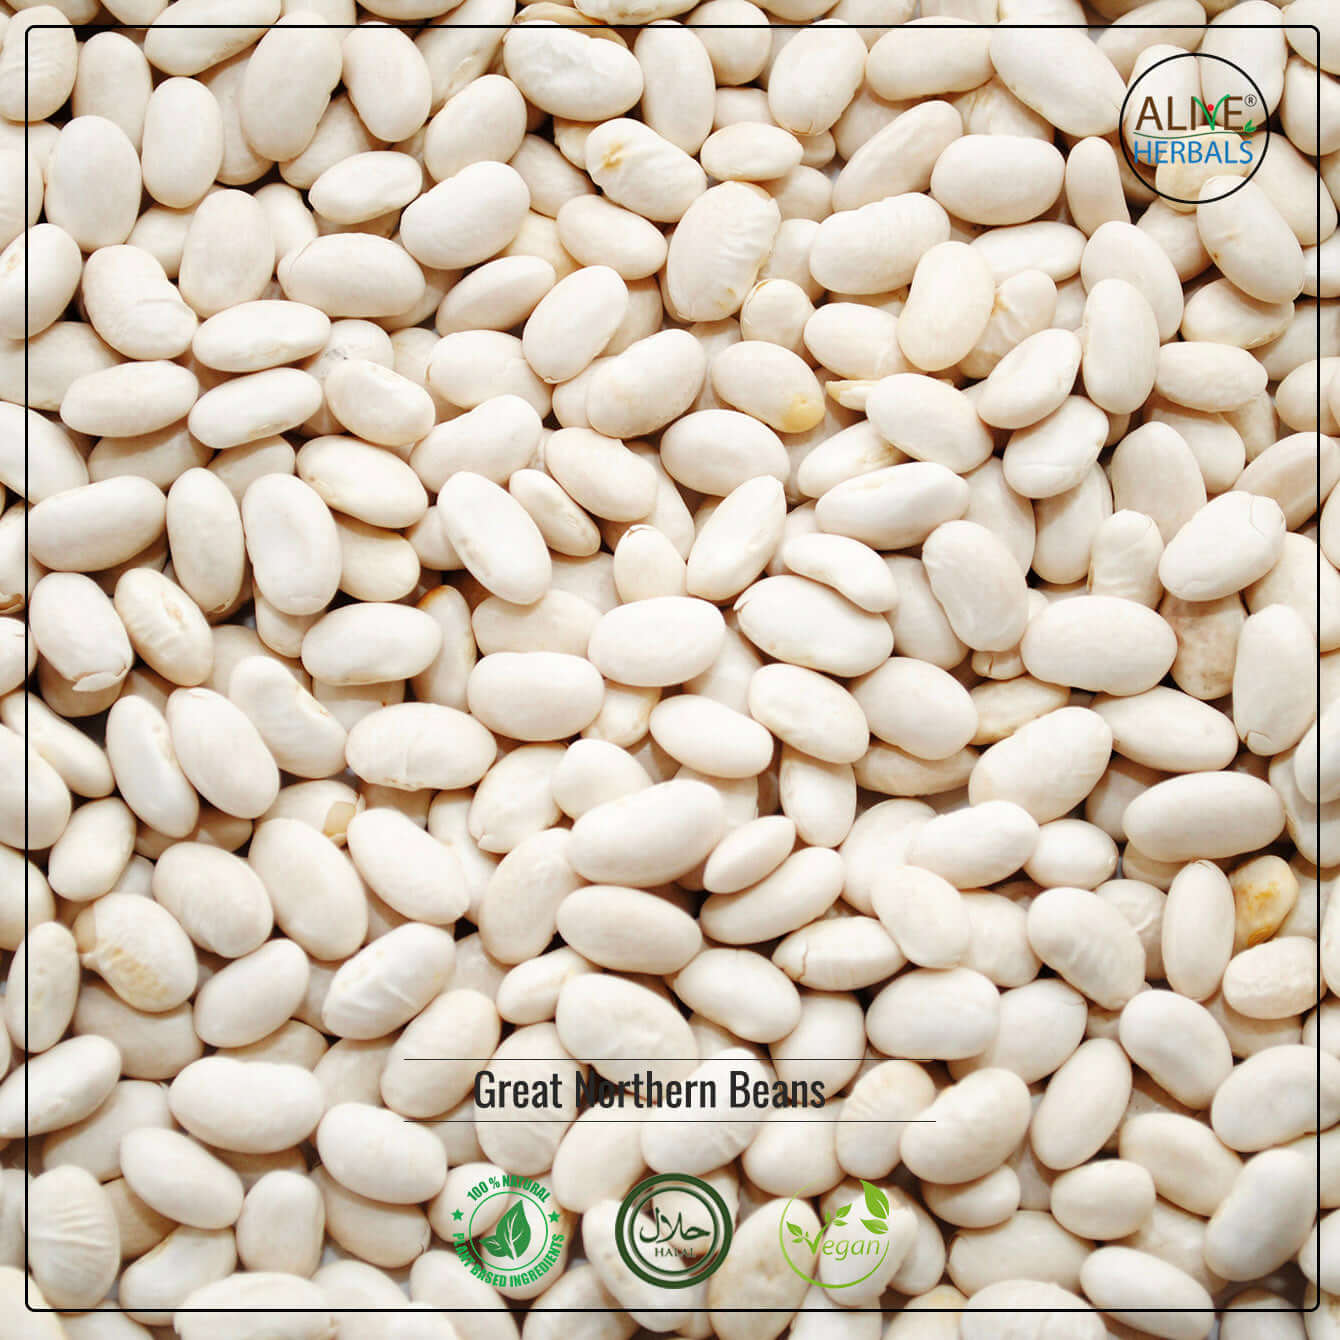 Great Northern Beans - Shop at Natural Food Store | Alive Herbals.